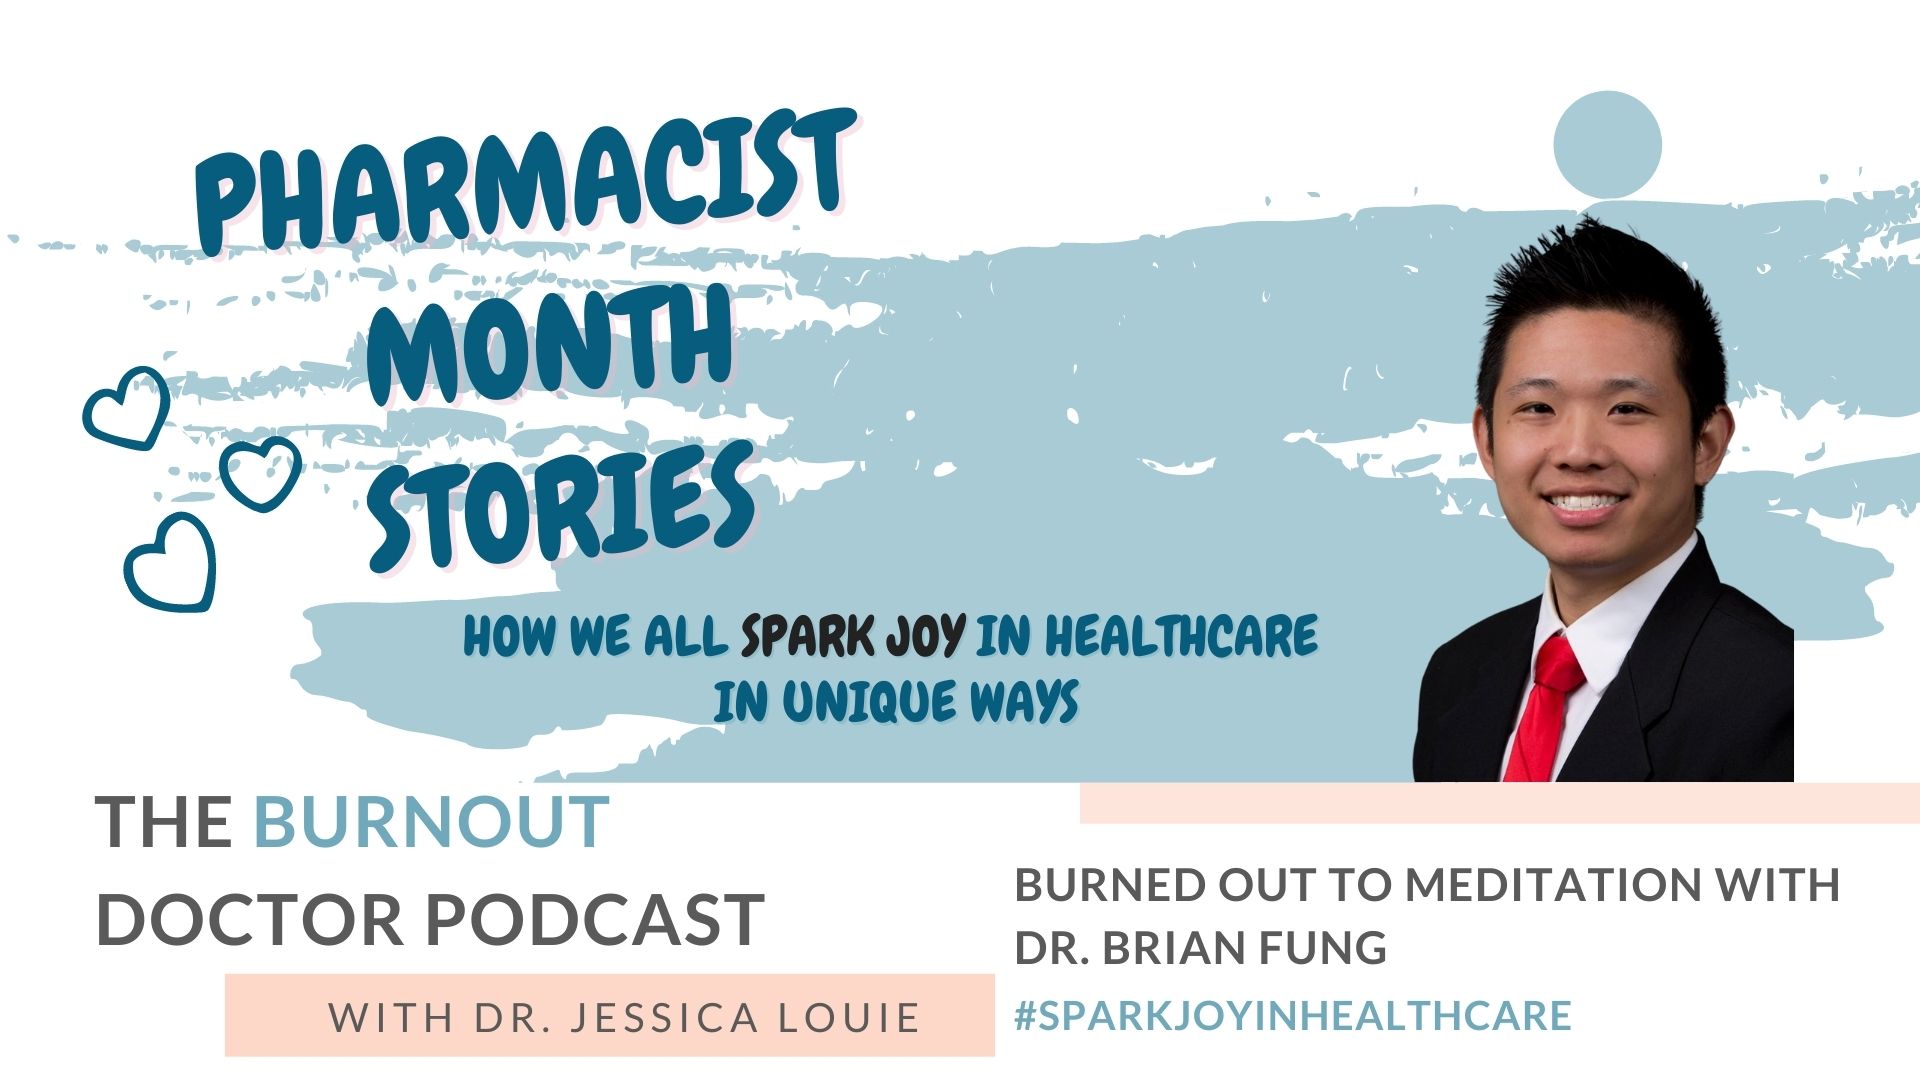 Dr. Brian Fung on The Burnout Doctor Podcast with Dr. Jessica Louie. Pharmacist Month stories. Pharmacist burnout in pharmacy informatics.